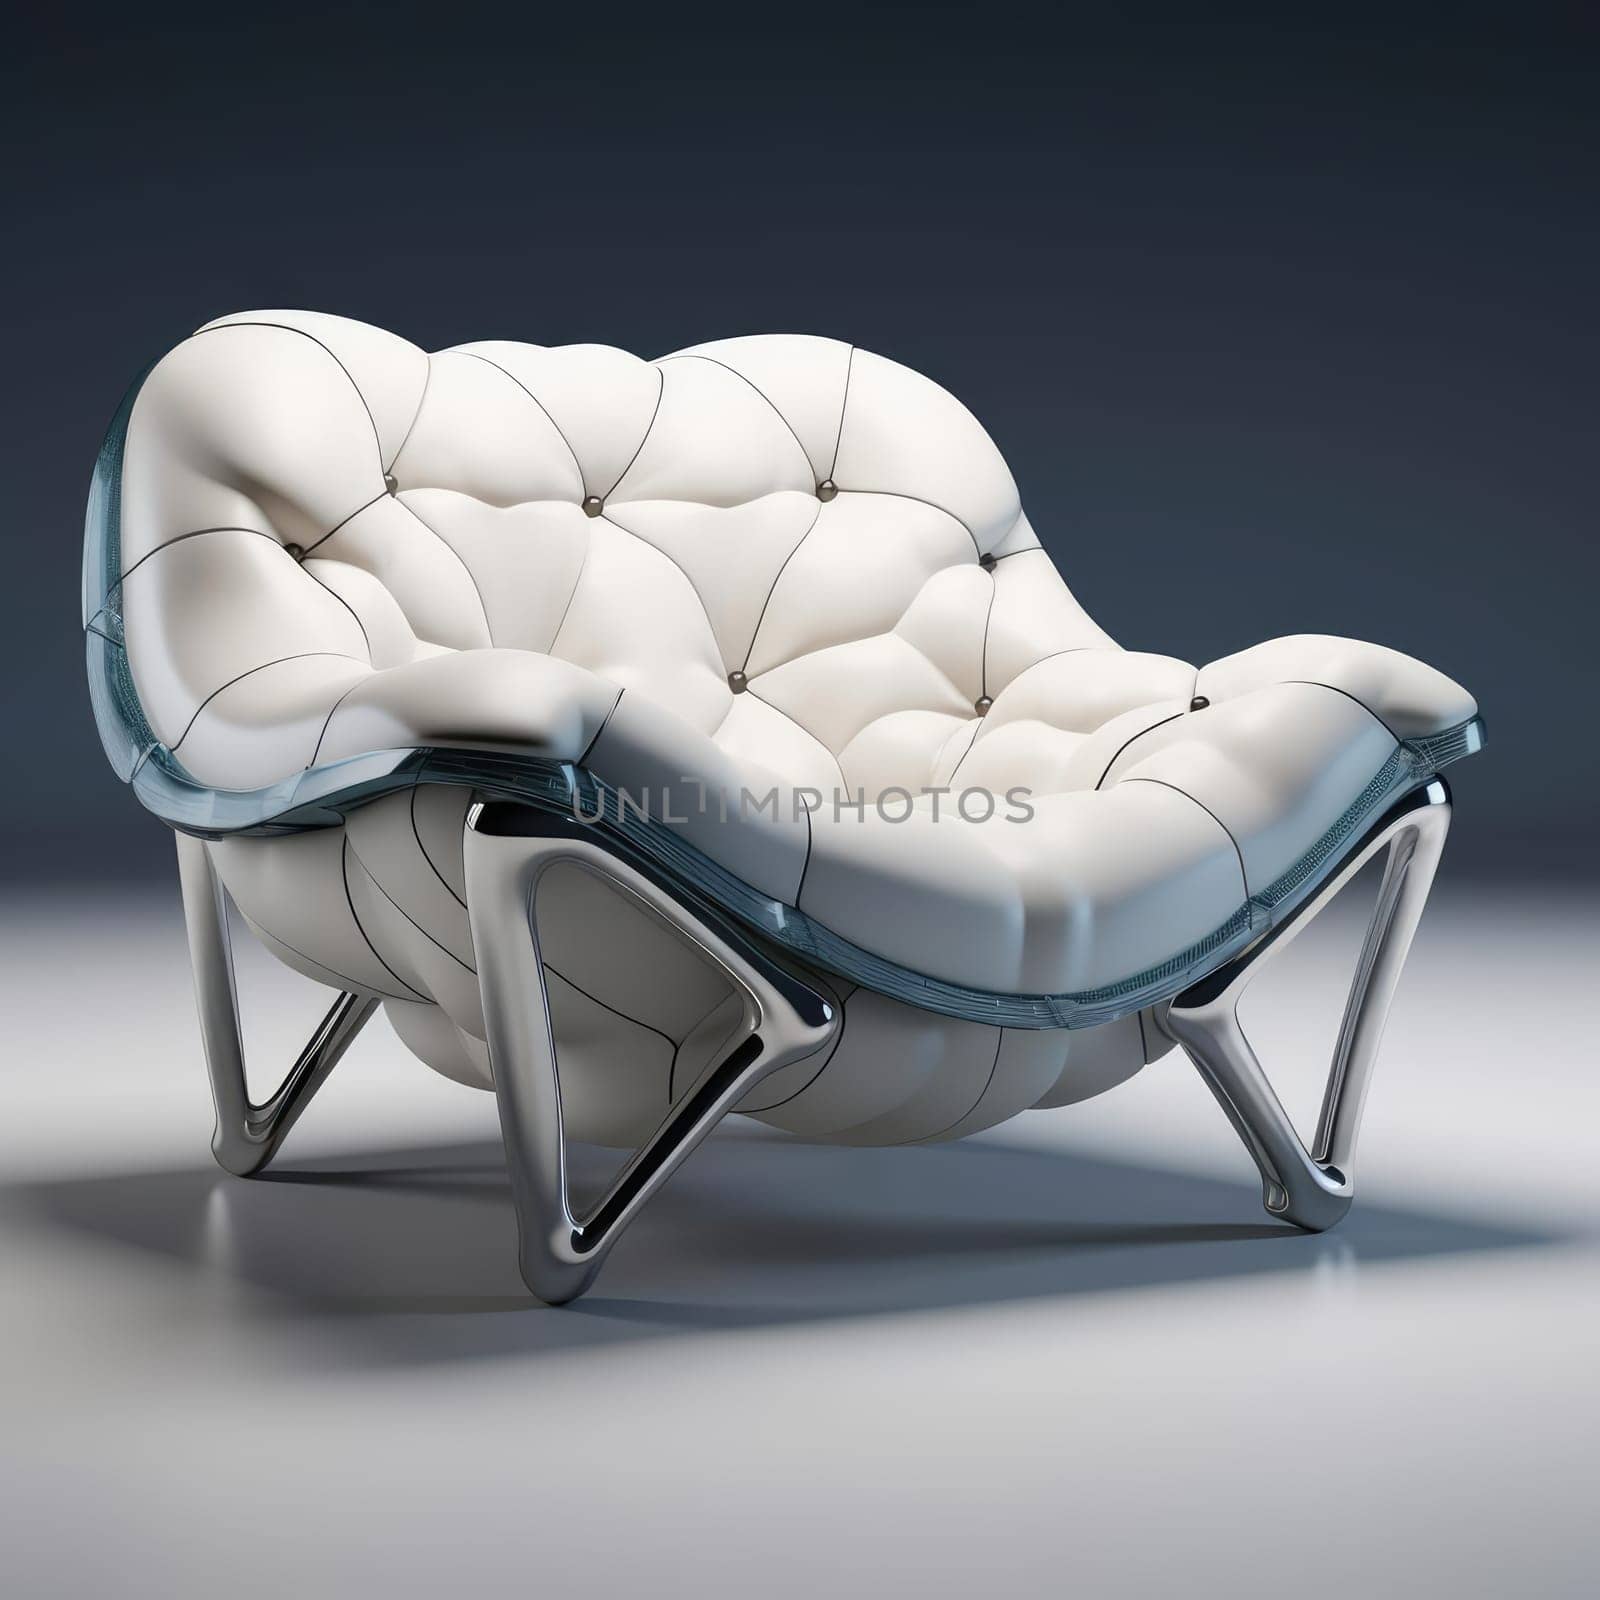 The armchair of the future by cherezoff